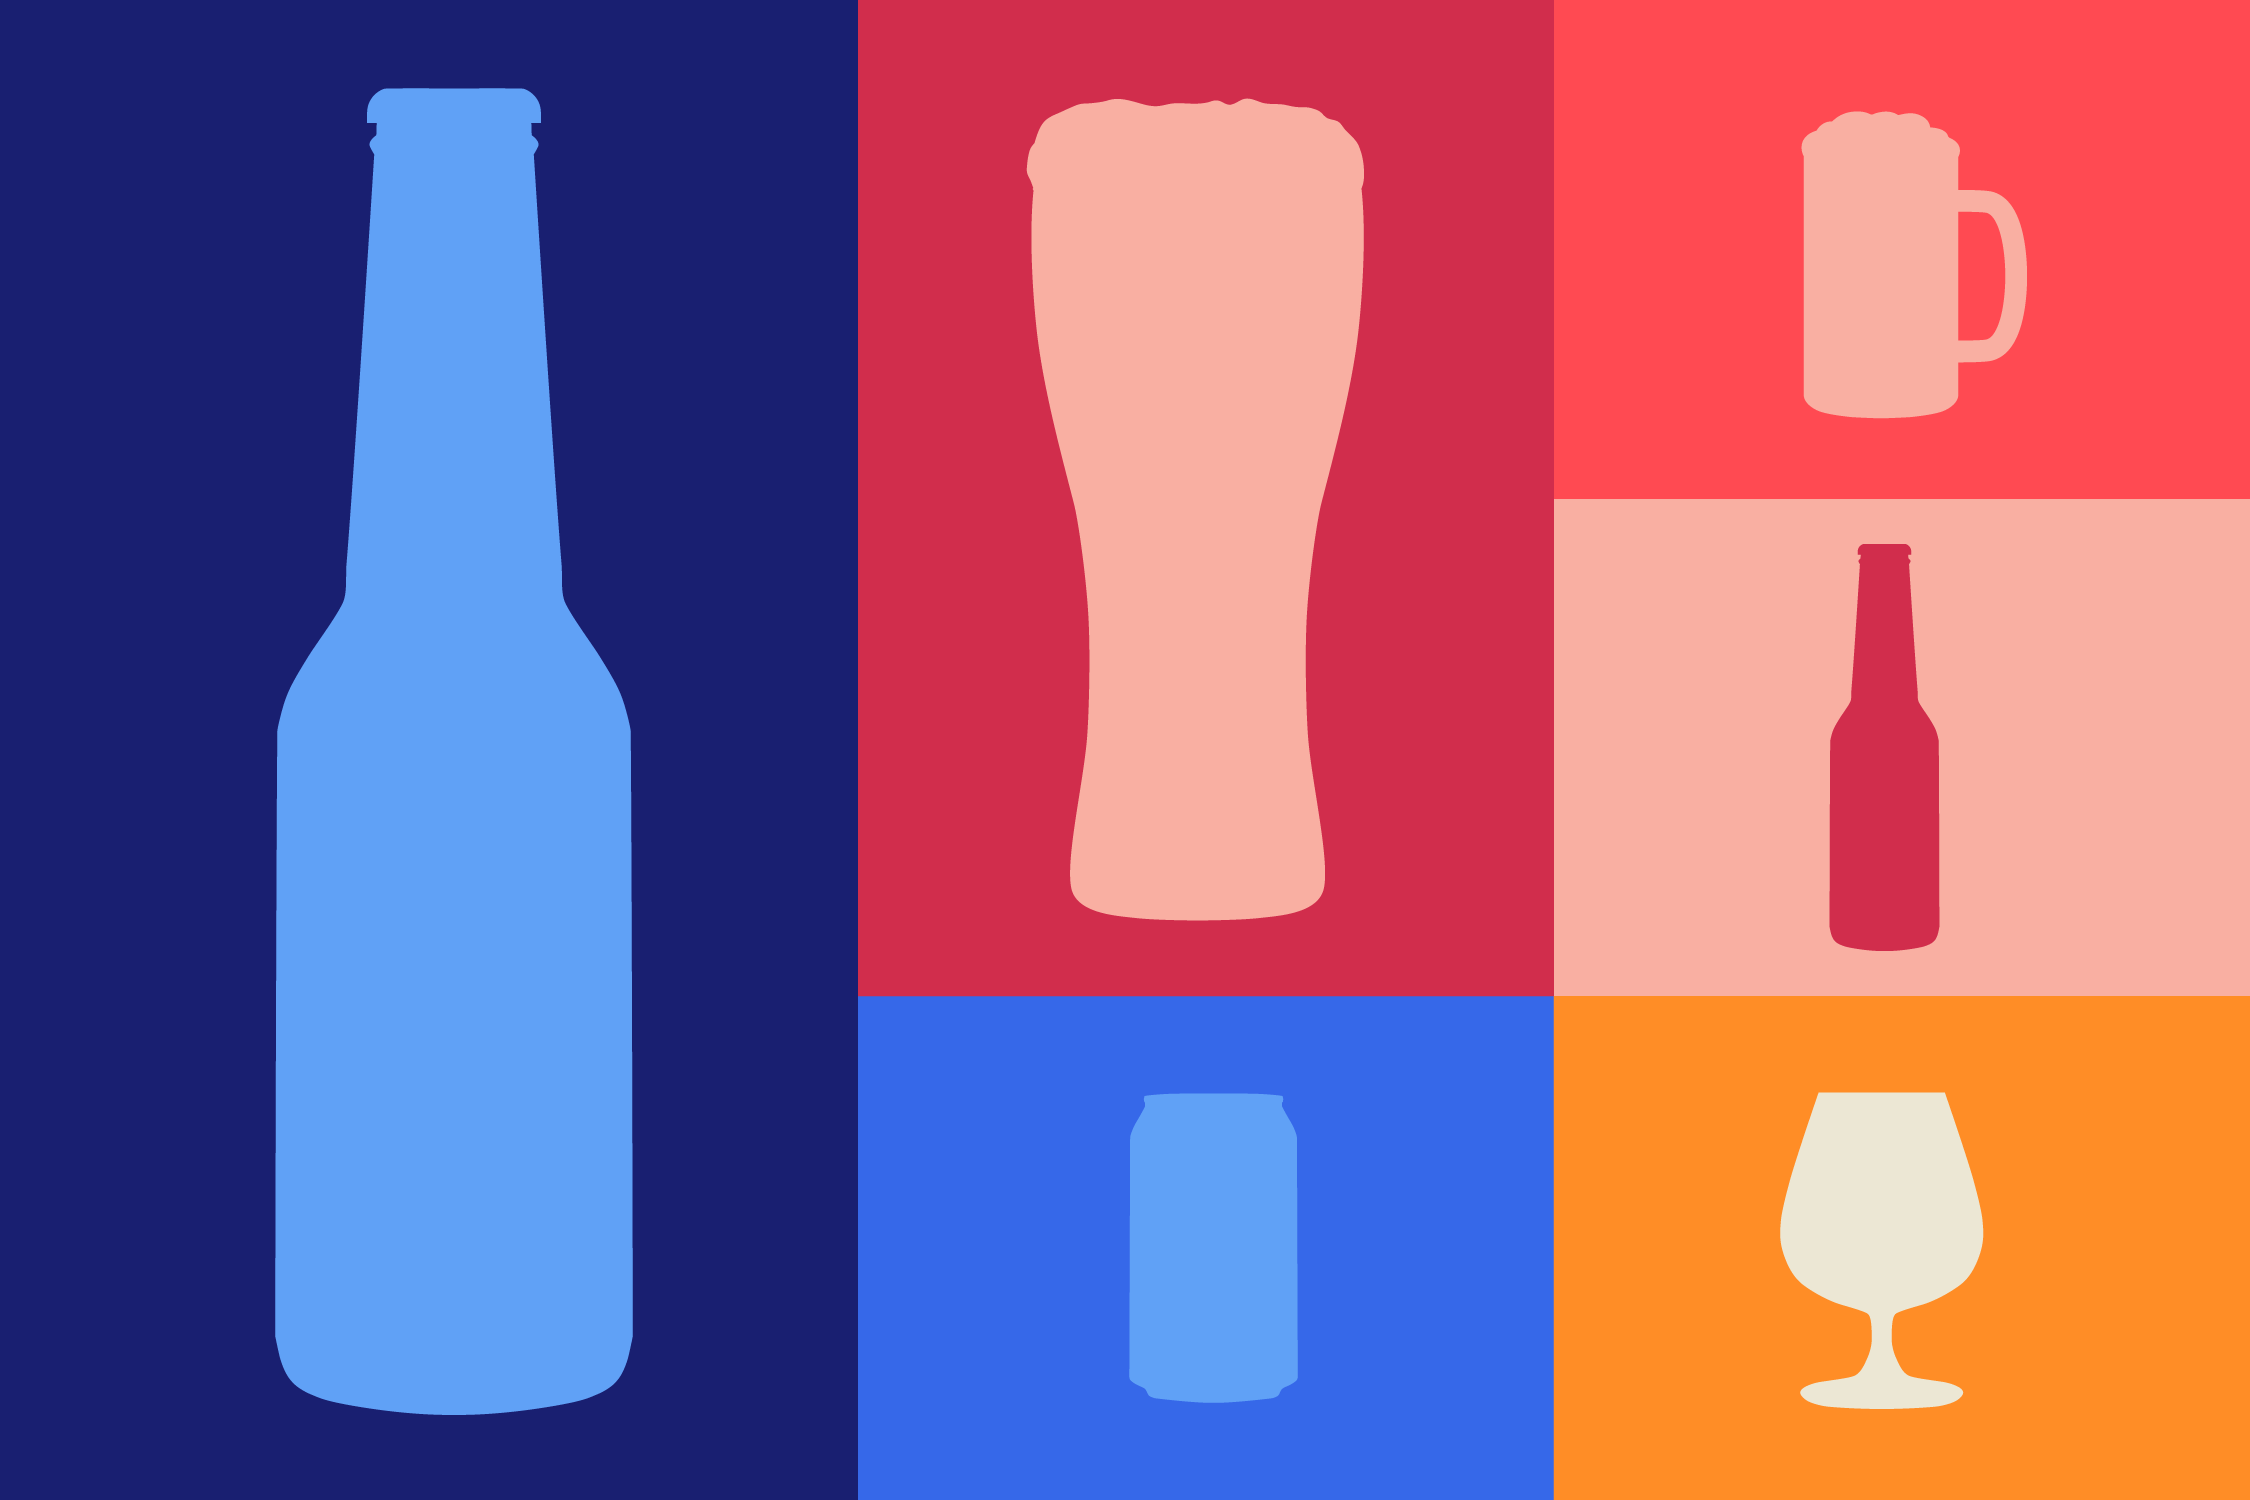 A colorful graphic features various drinks. It includes a blue bottle on a dark blue background, a pink pint glass on a red background, a pink mug on a pink background, a red bottle on a light pink background, a blue can on a blue background, and a yellow wine glass on an orange background.